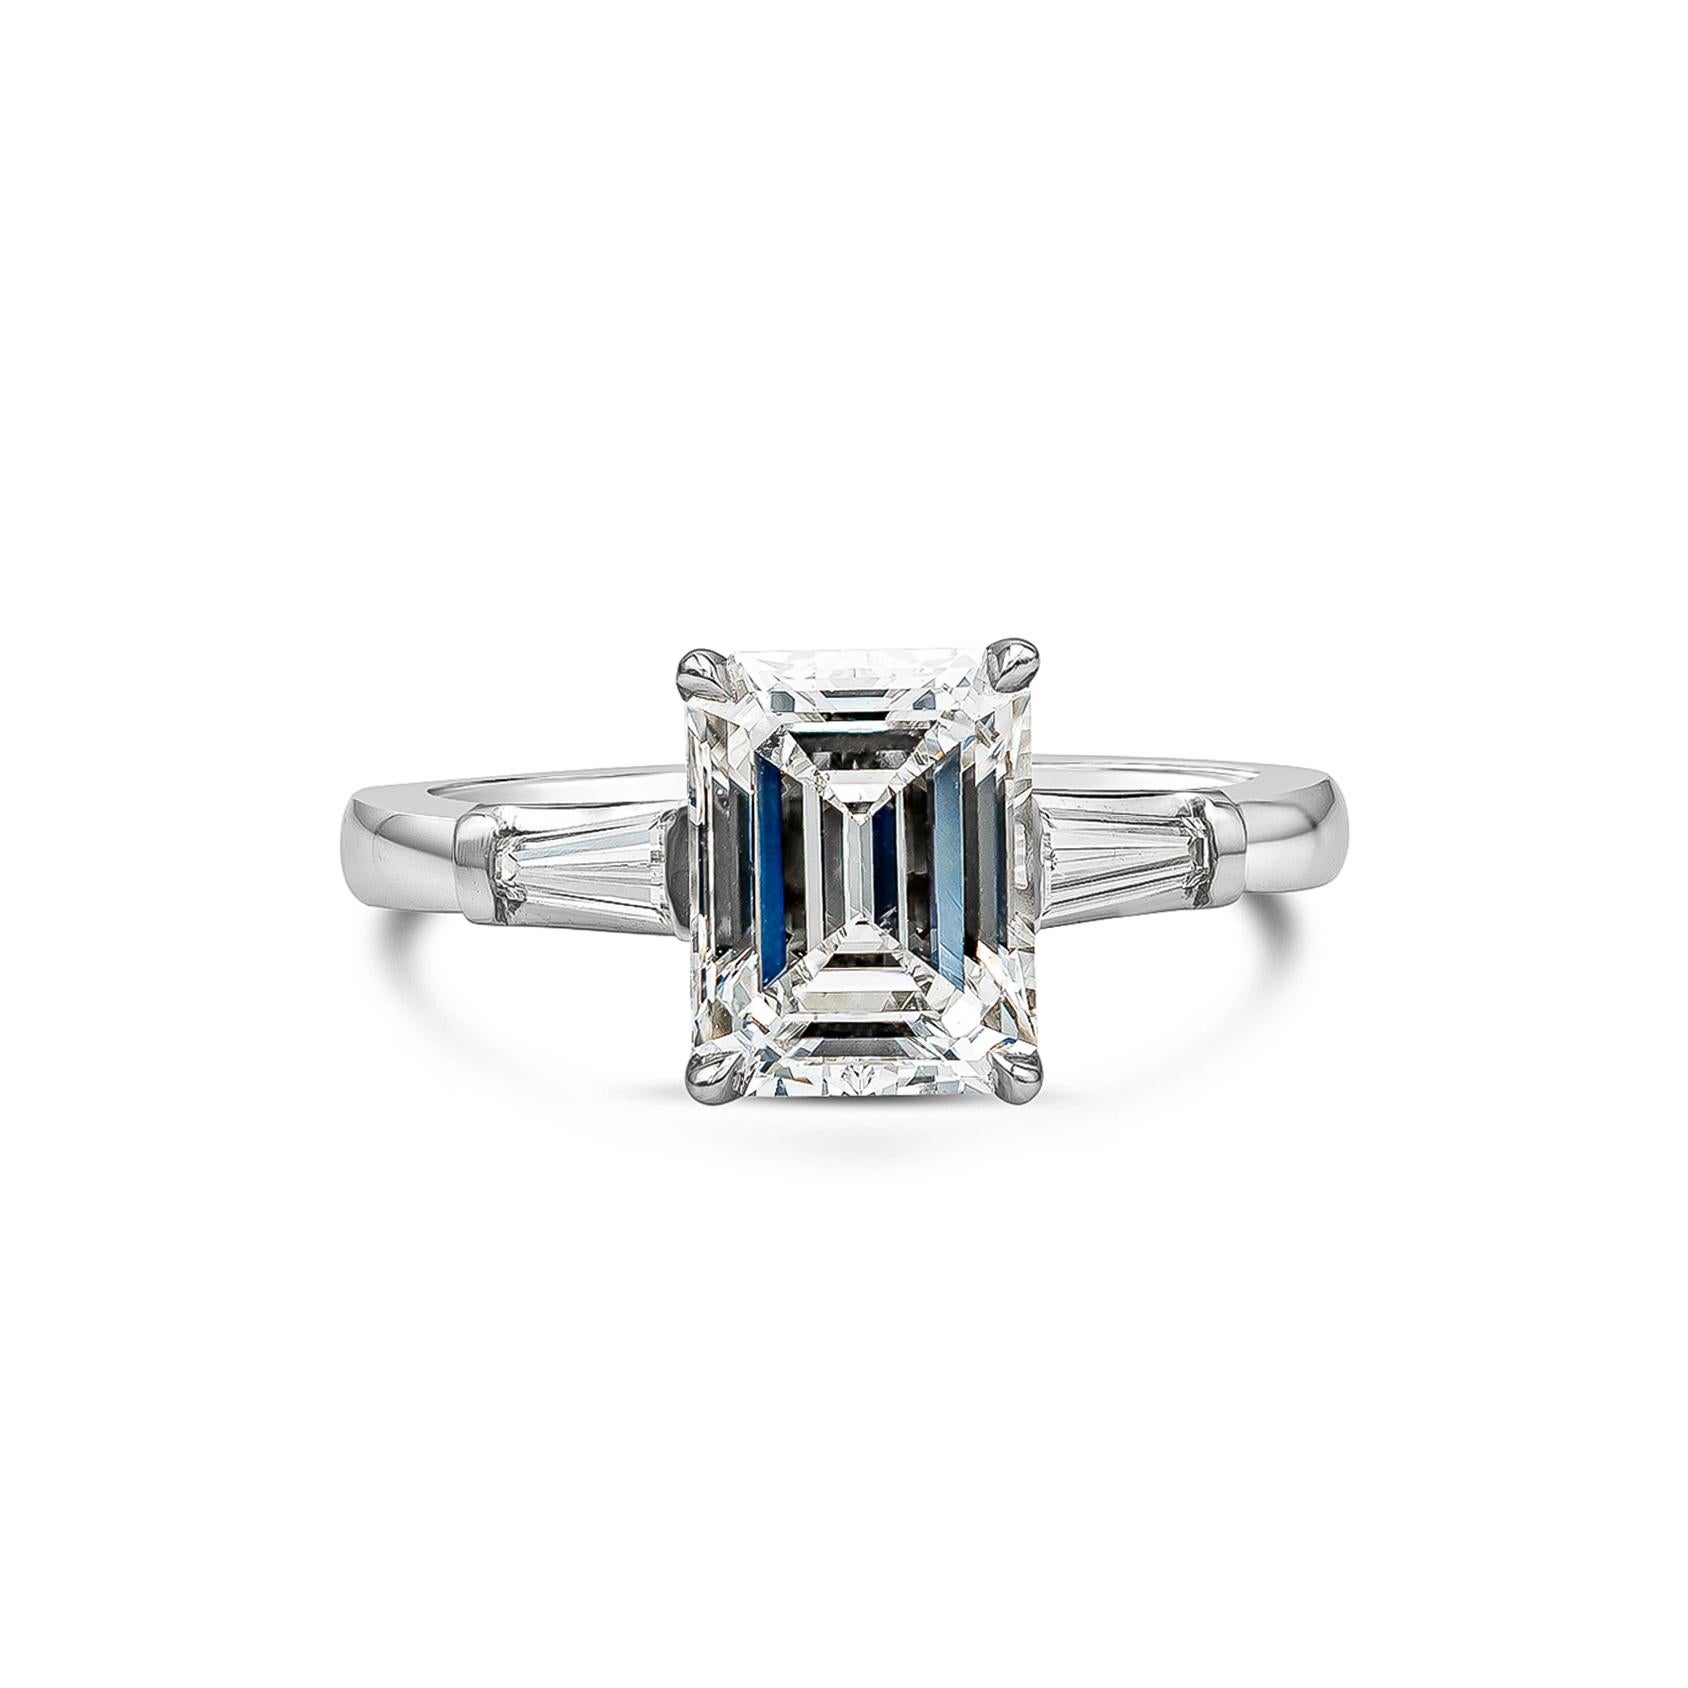 A timeless engagement ring showcasing 2.12 carat emerald cut diamond certified by GIA as G color, SI1 clarity. Flanking the center are tapered baguette diamonds weighing 0.25 carats. Made in platinum. Size 5.75 US (sizable upon request).

Style